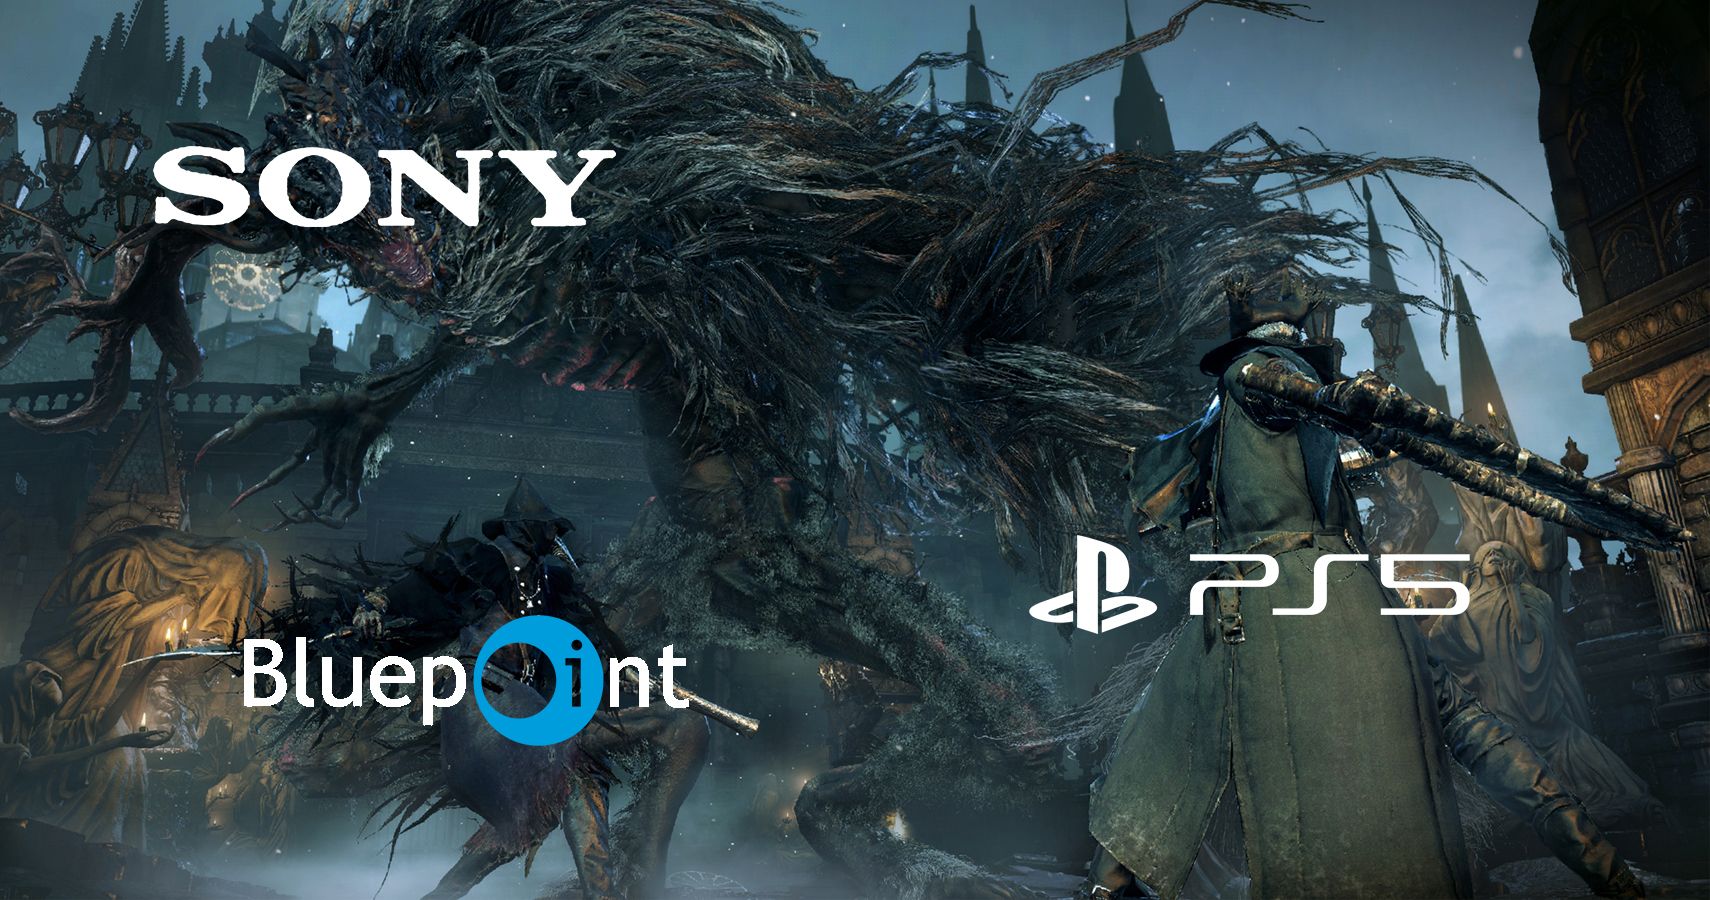 Bloodborne is getting a remaster - rumored details about rumored PC and PS5  ports 